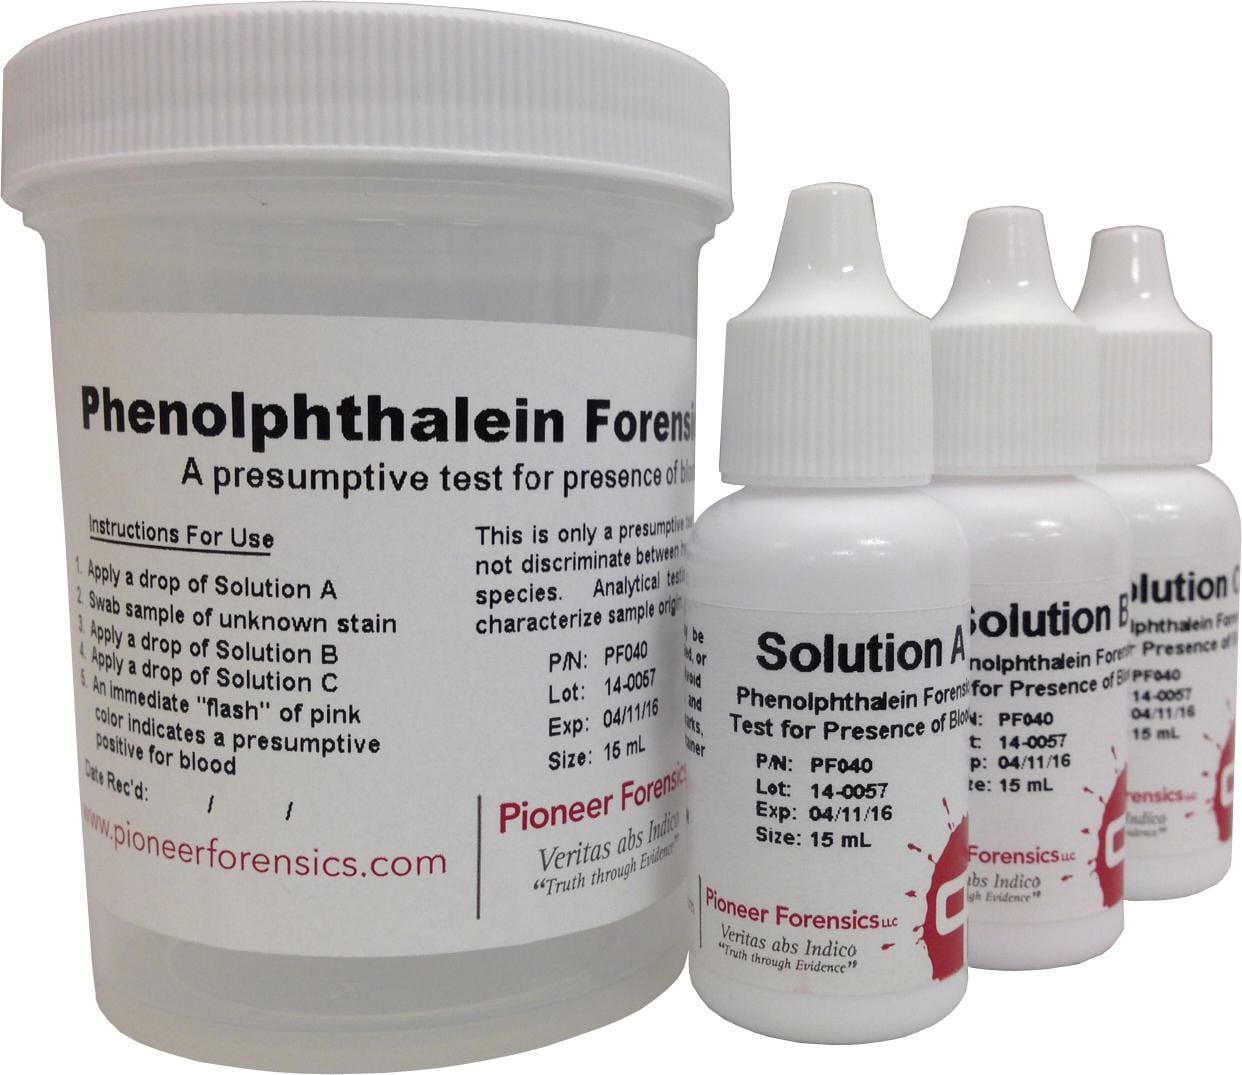 Phenolphthalein is one of the most commonly used chemicals in the field and laboratory to indicate the presence of blood.